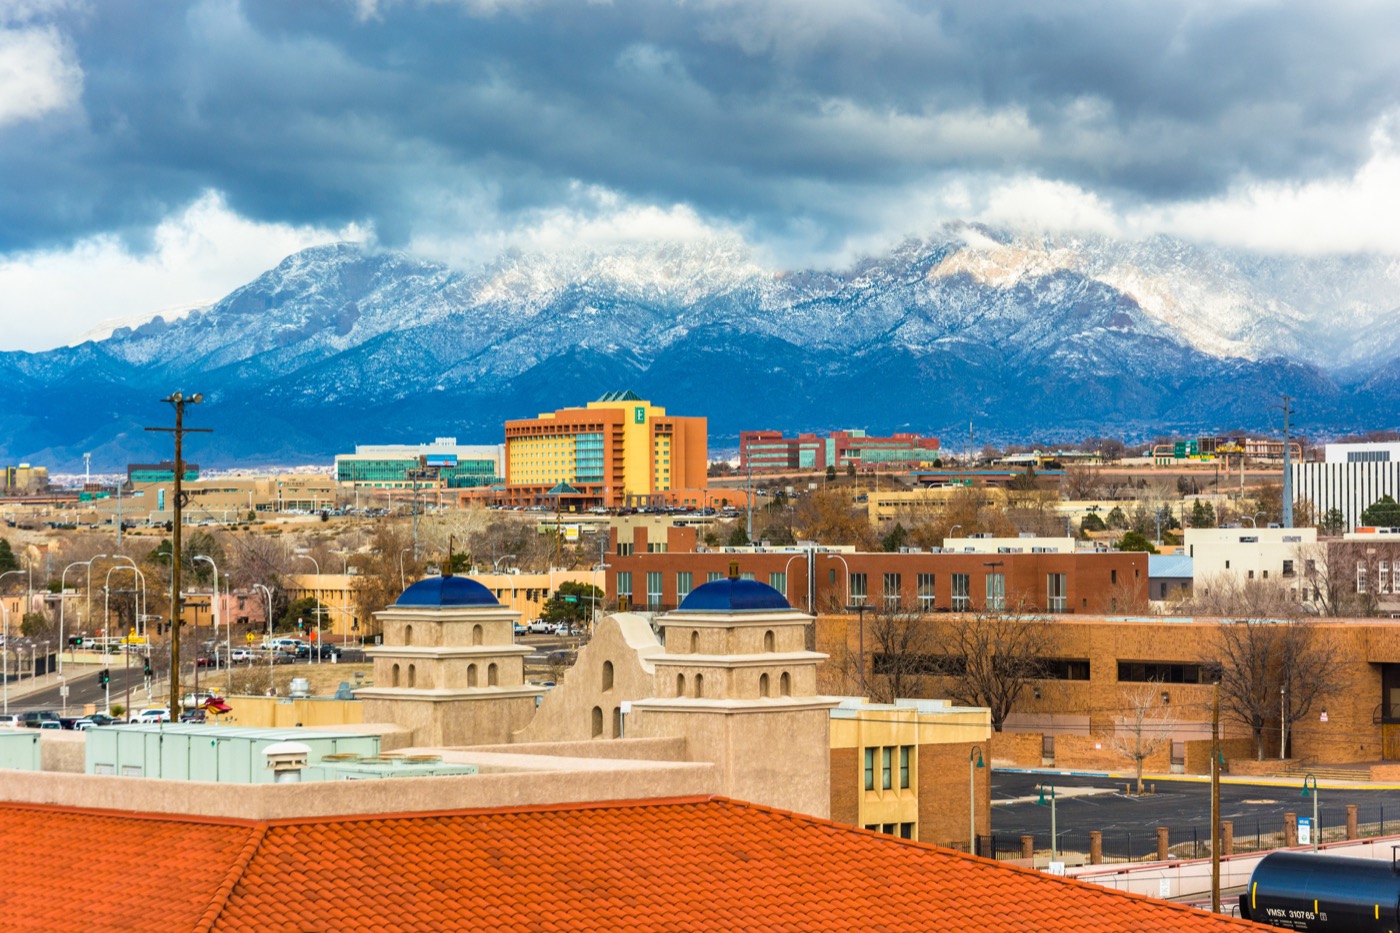 View of distant mountains and buildings in Albuquerque, New Mexico.